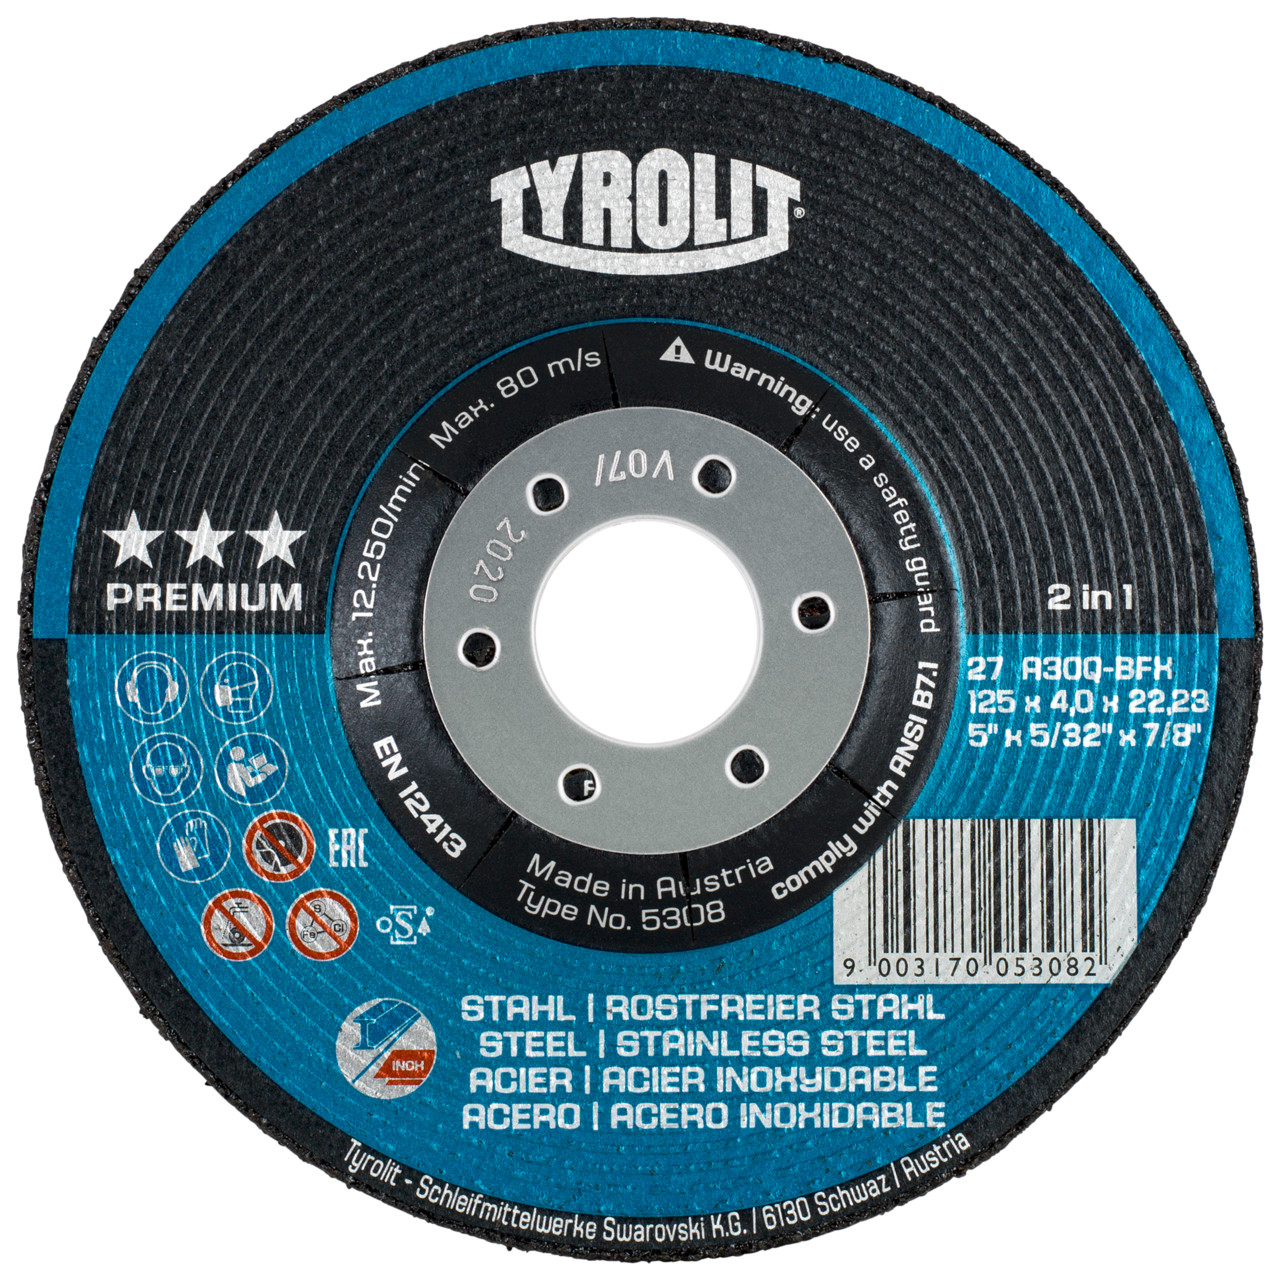 TYROLIT grinding wheel DxUxH 178x7x22.23 2in1 for steel and stainless steel, shape: 27 - offset version, Art. 34046133